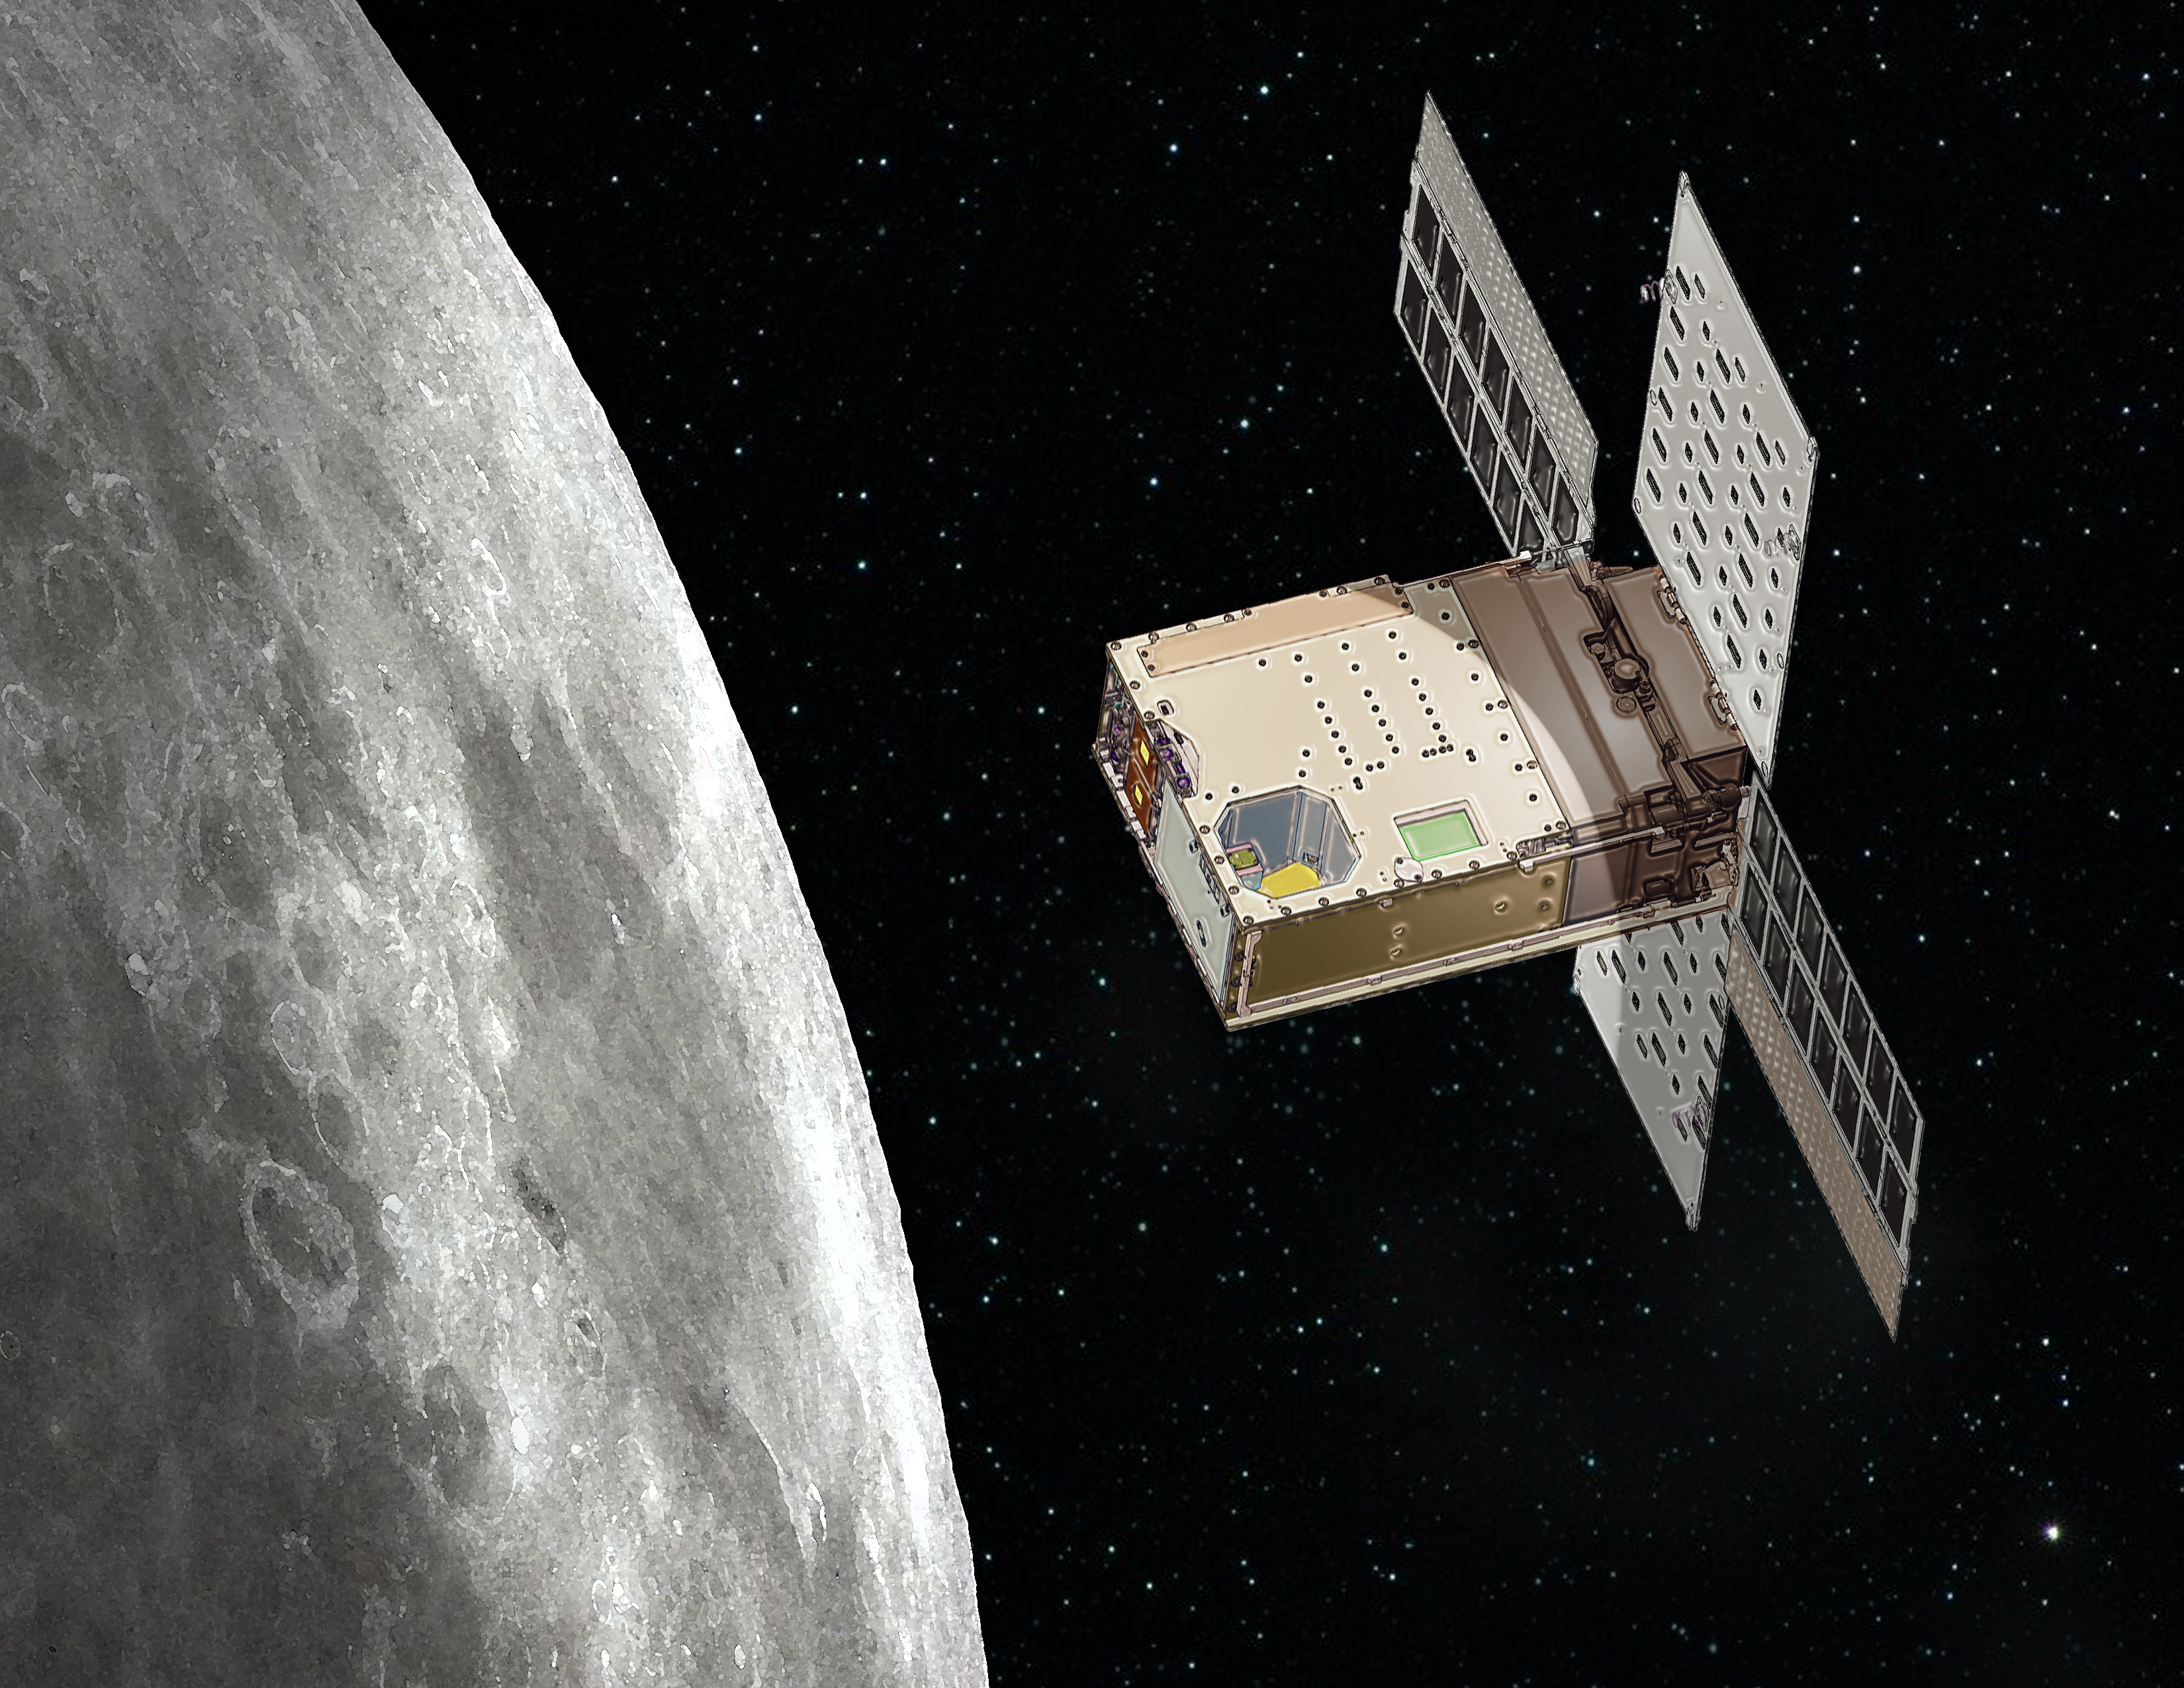 NASA's Lunar Flashlight struggling to get to the Moon; agency developing new plan